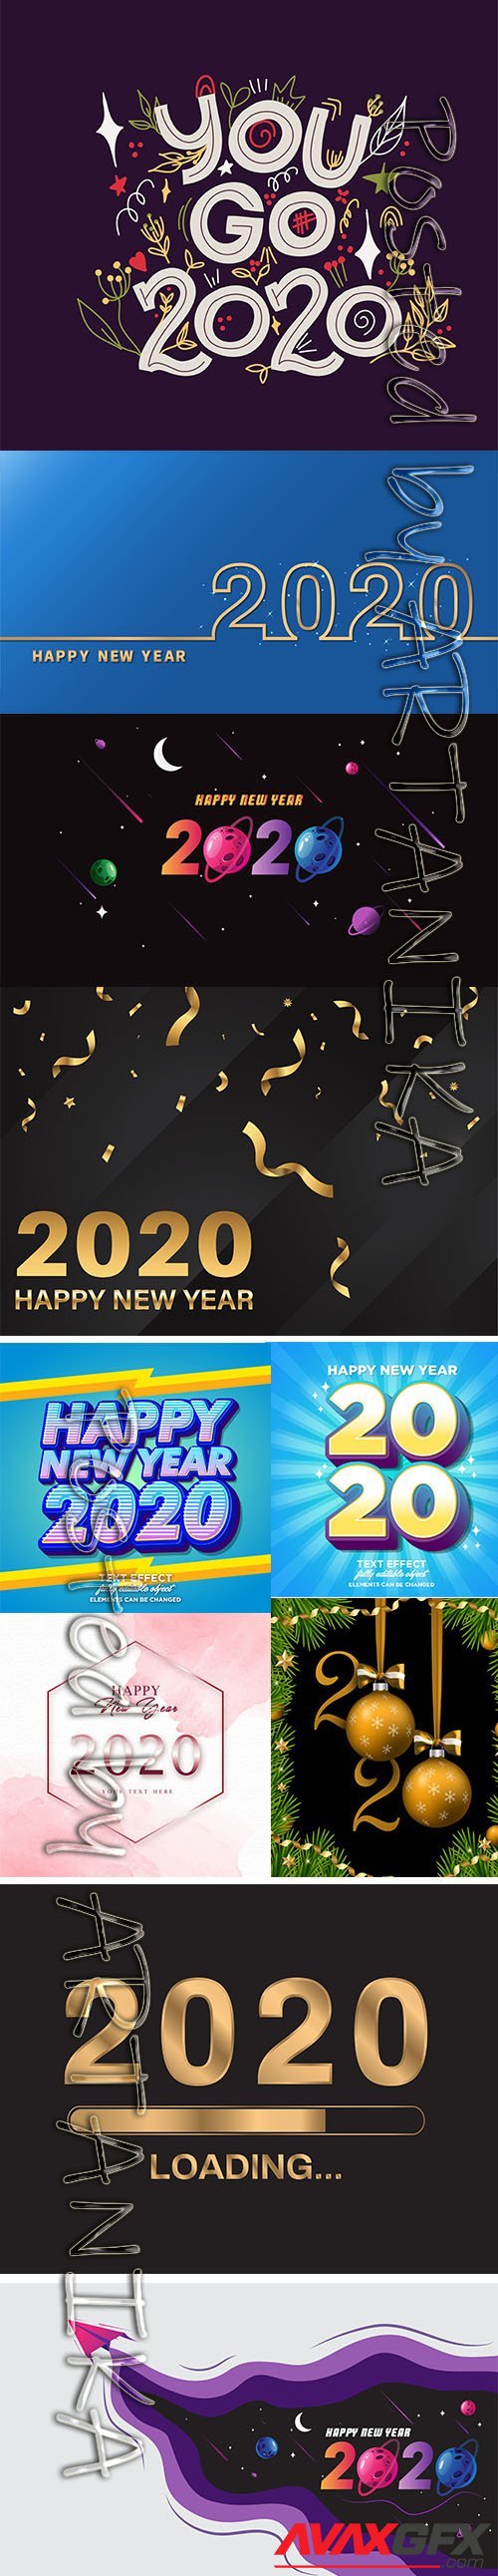 Merry Christmas and New Year 2020 Vector Illustrations Pack Set 11